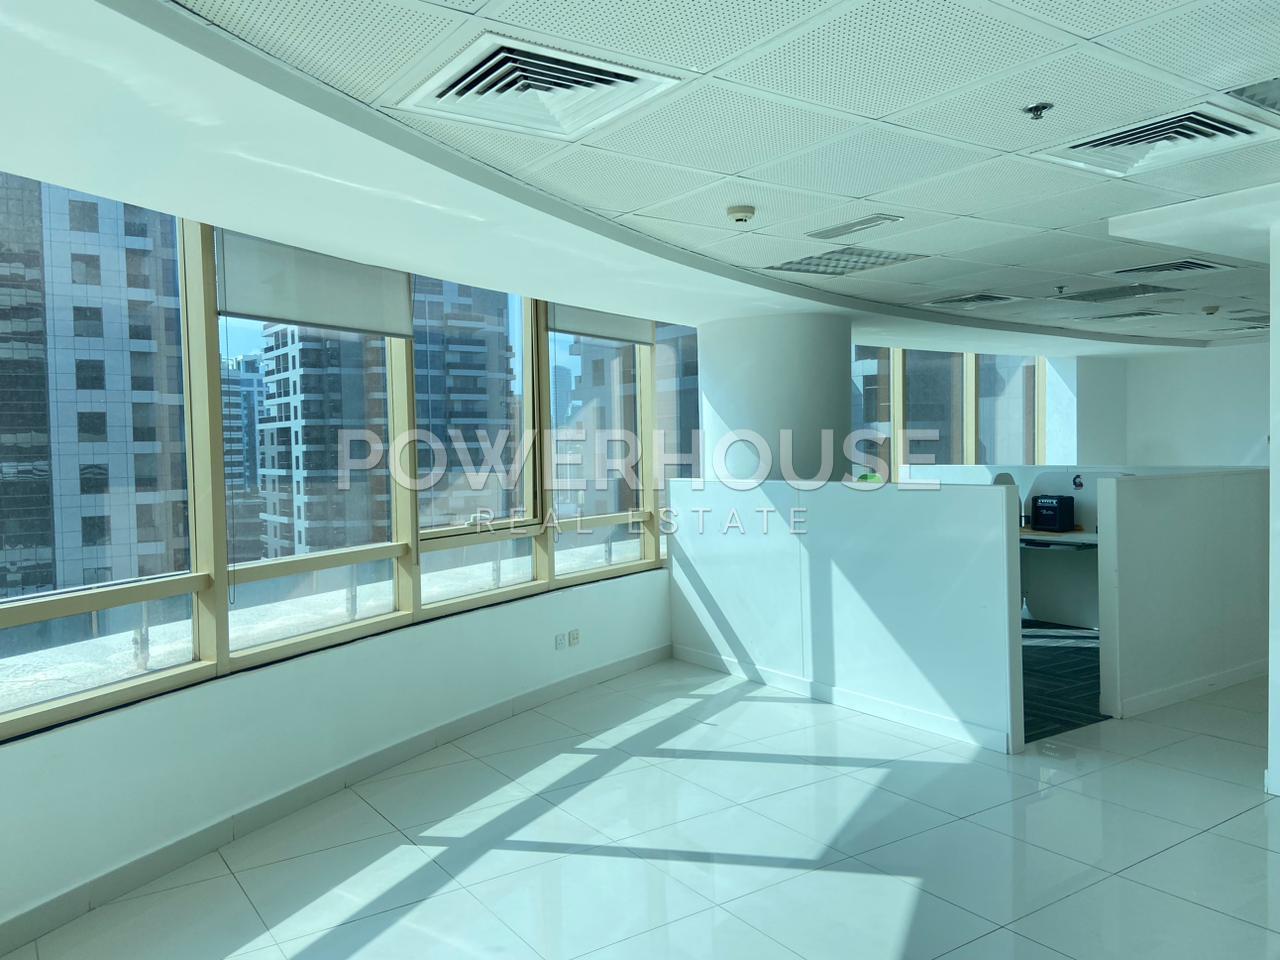  Office Space For Rent in Fortune Executive Tower